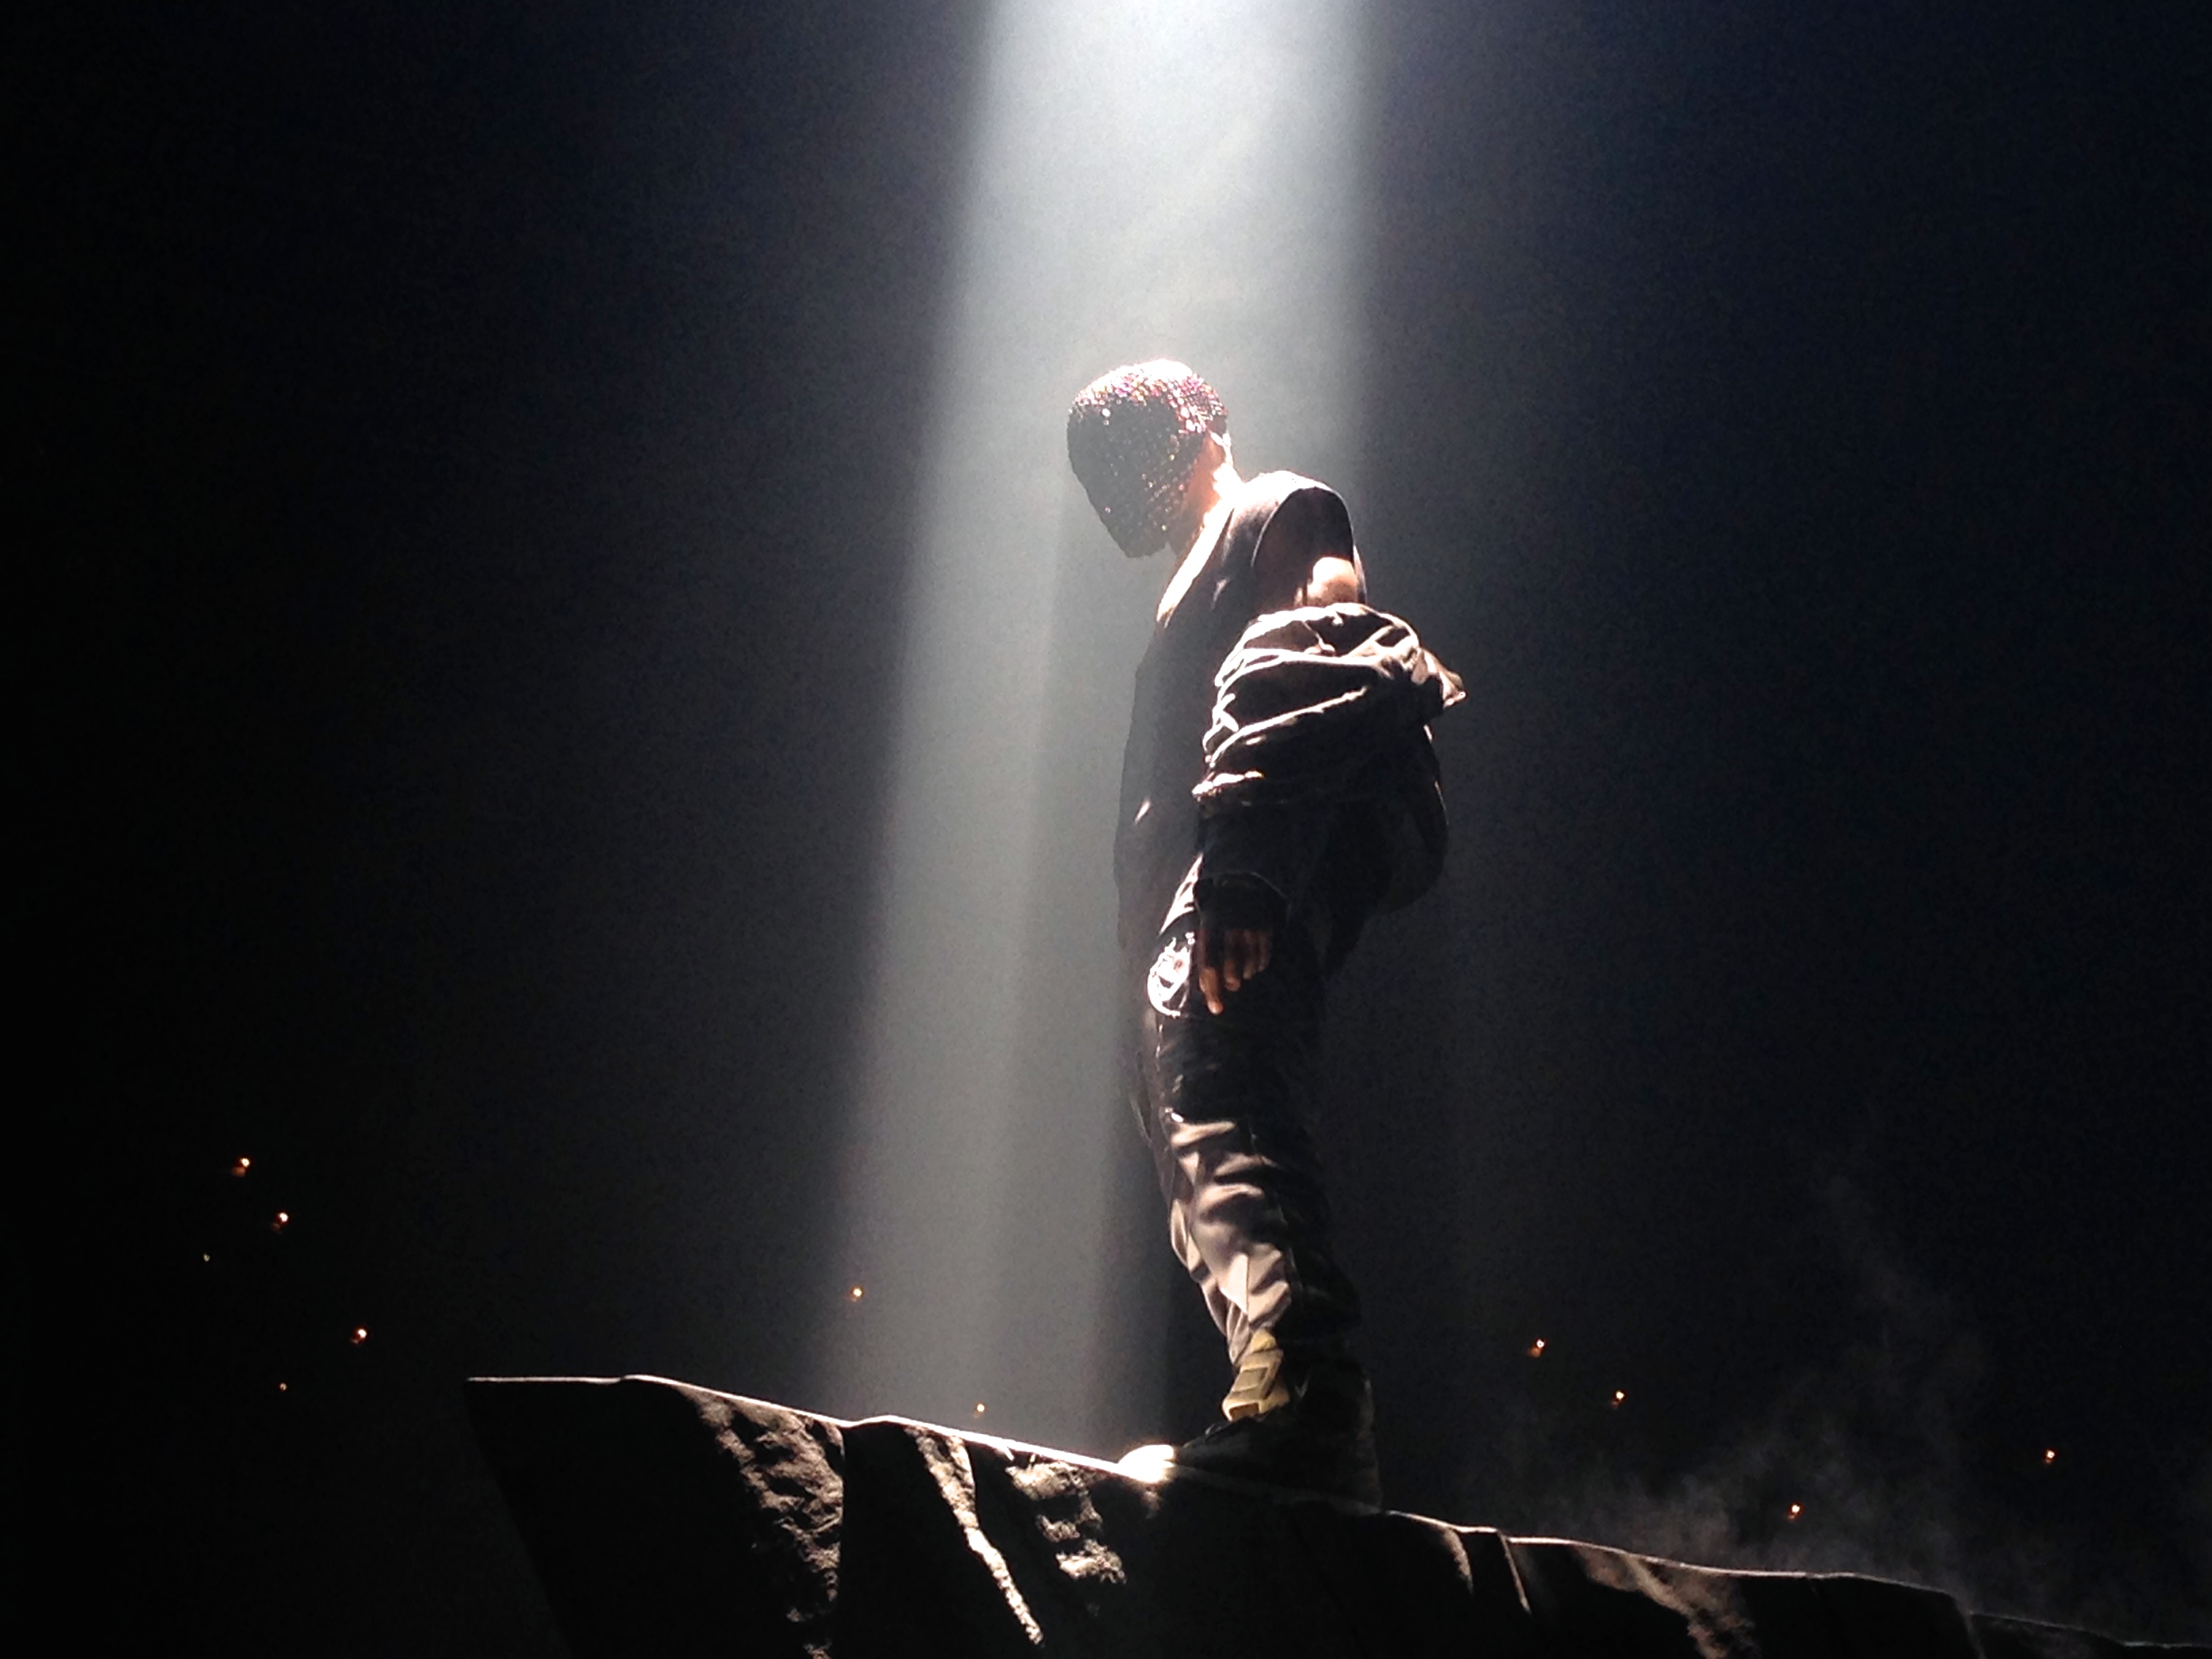 Haters Forgot About Their Dreams: Kanye West Live in Baltimore